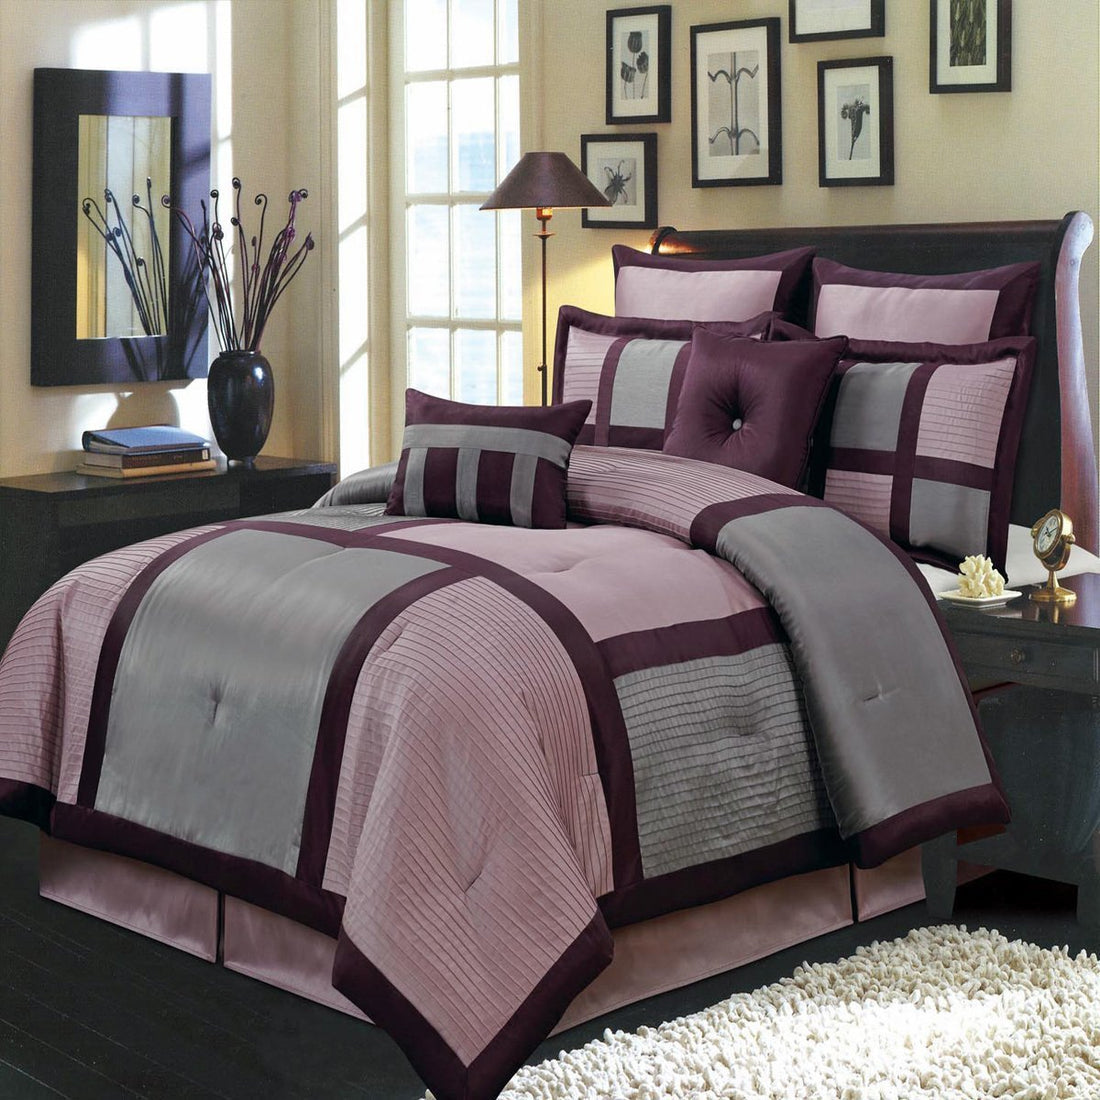 Hotel Bedding Morgan Purple and Gray King Size Luxury 8 Piece Comforter Set Includes Comforter, Bed Skirt, Pillow Shams, Decorative Pillows